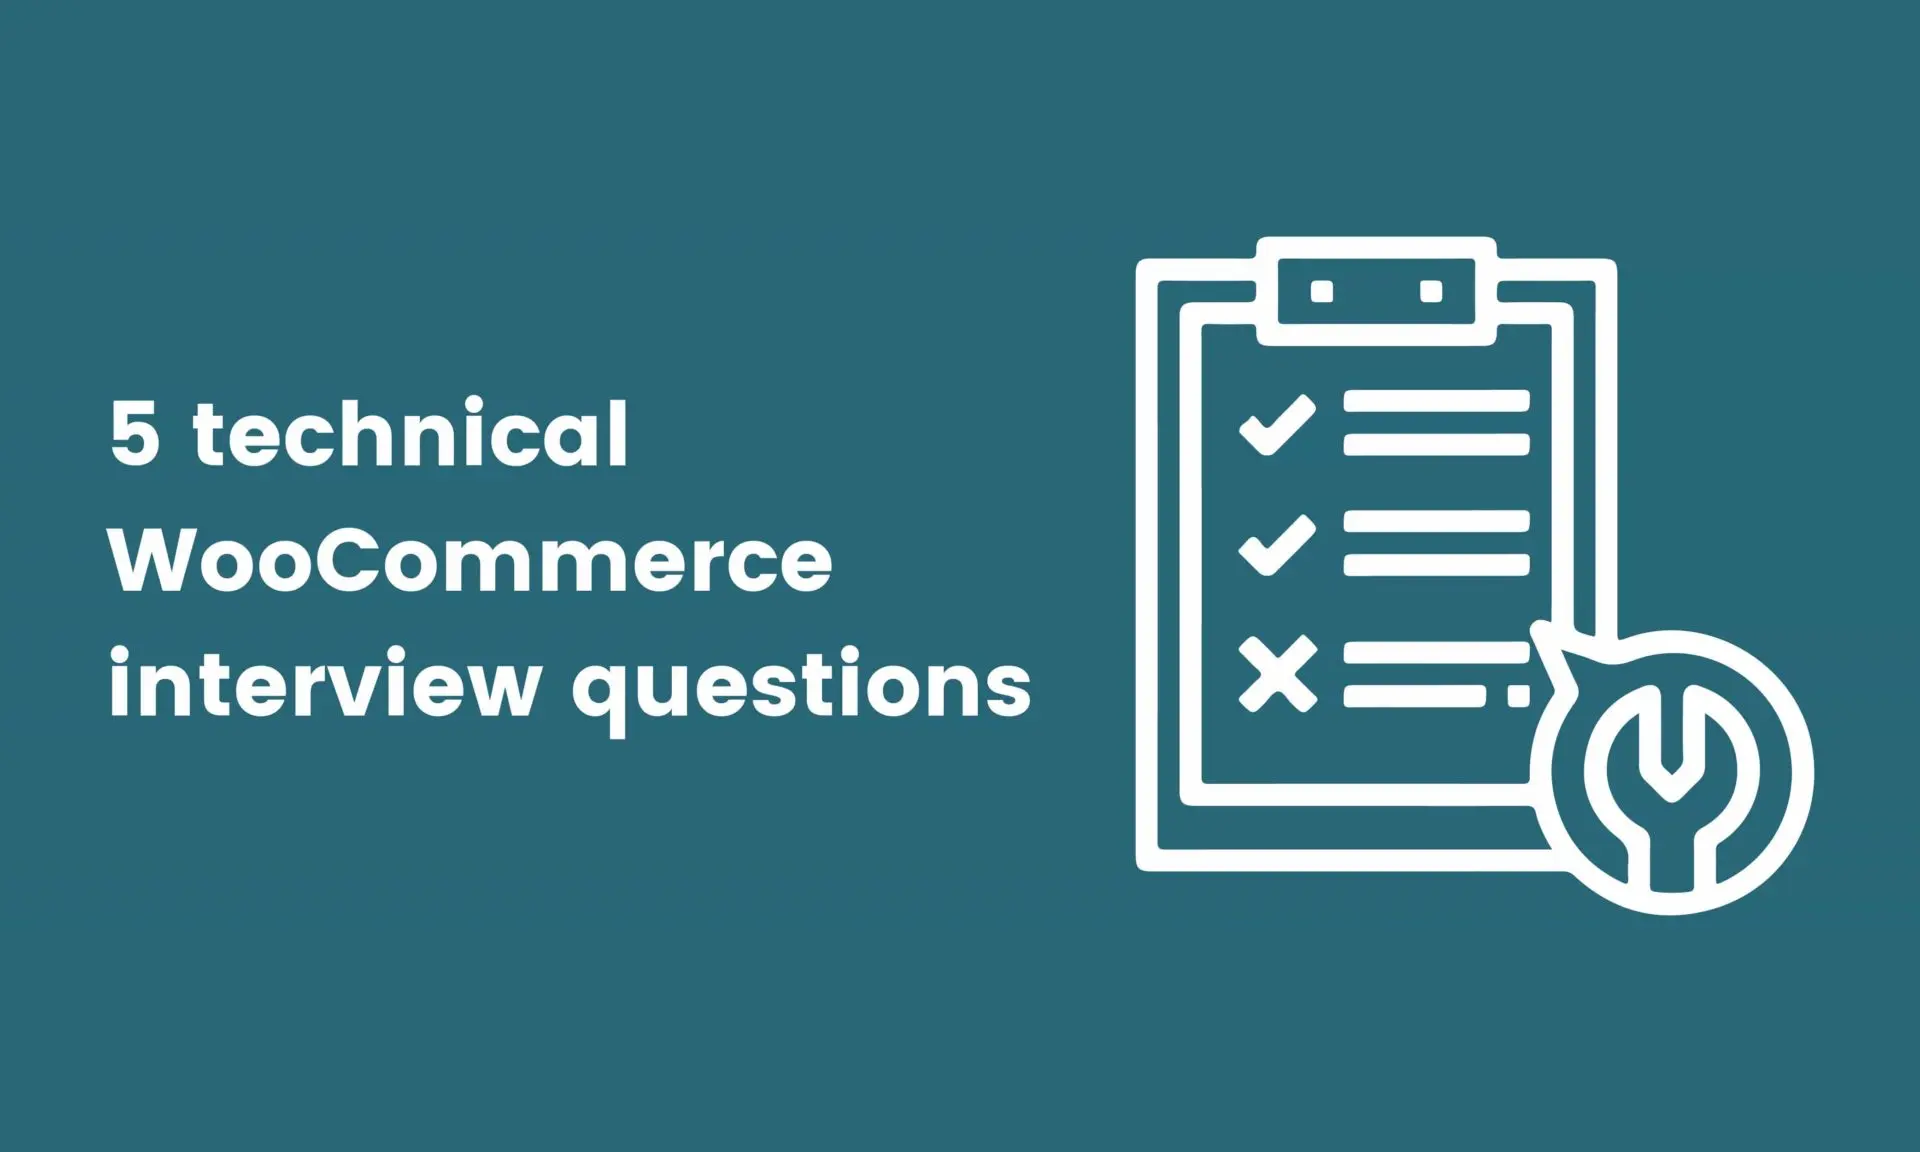 image showing 5 technical WooCommerce interview questions 